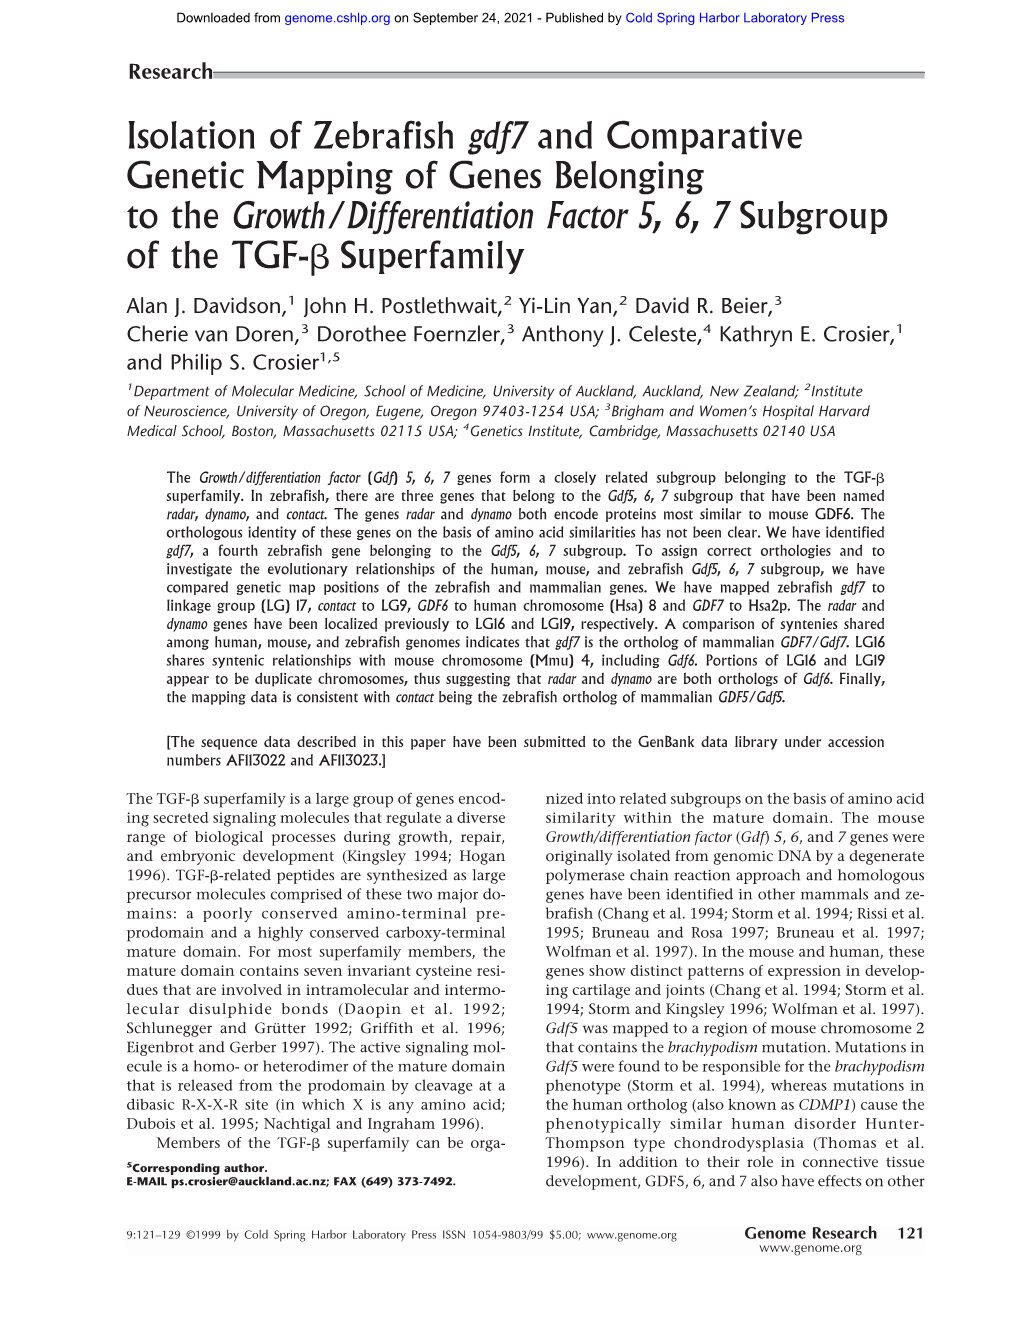 Isolation of Zebrafish Gdf7 and Comparative Genetic Mapping of Genes Belonging to the Growth/Differentiation Factor 5, 6, 7 Subgroup of the TGF-␤ Superfamily Alan J